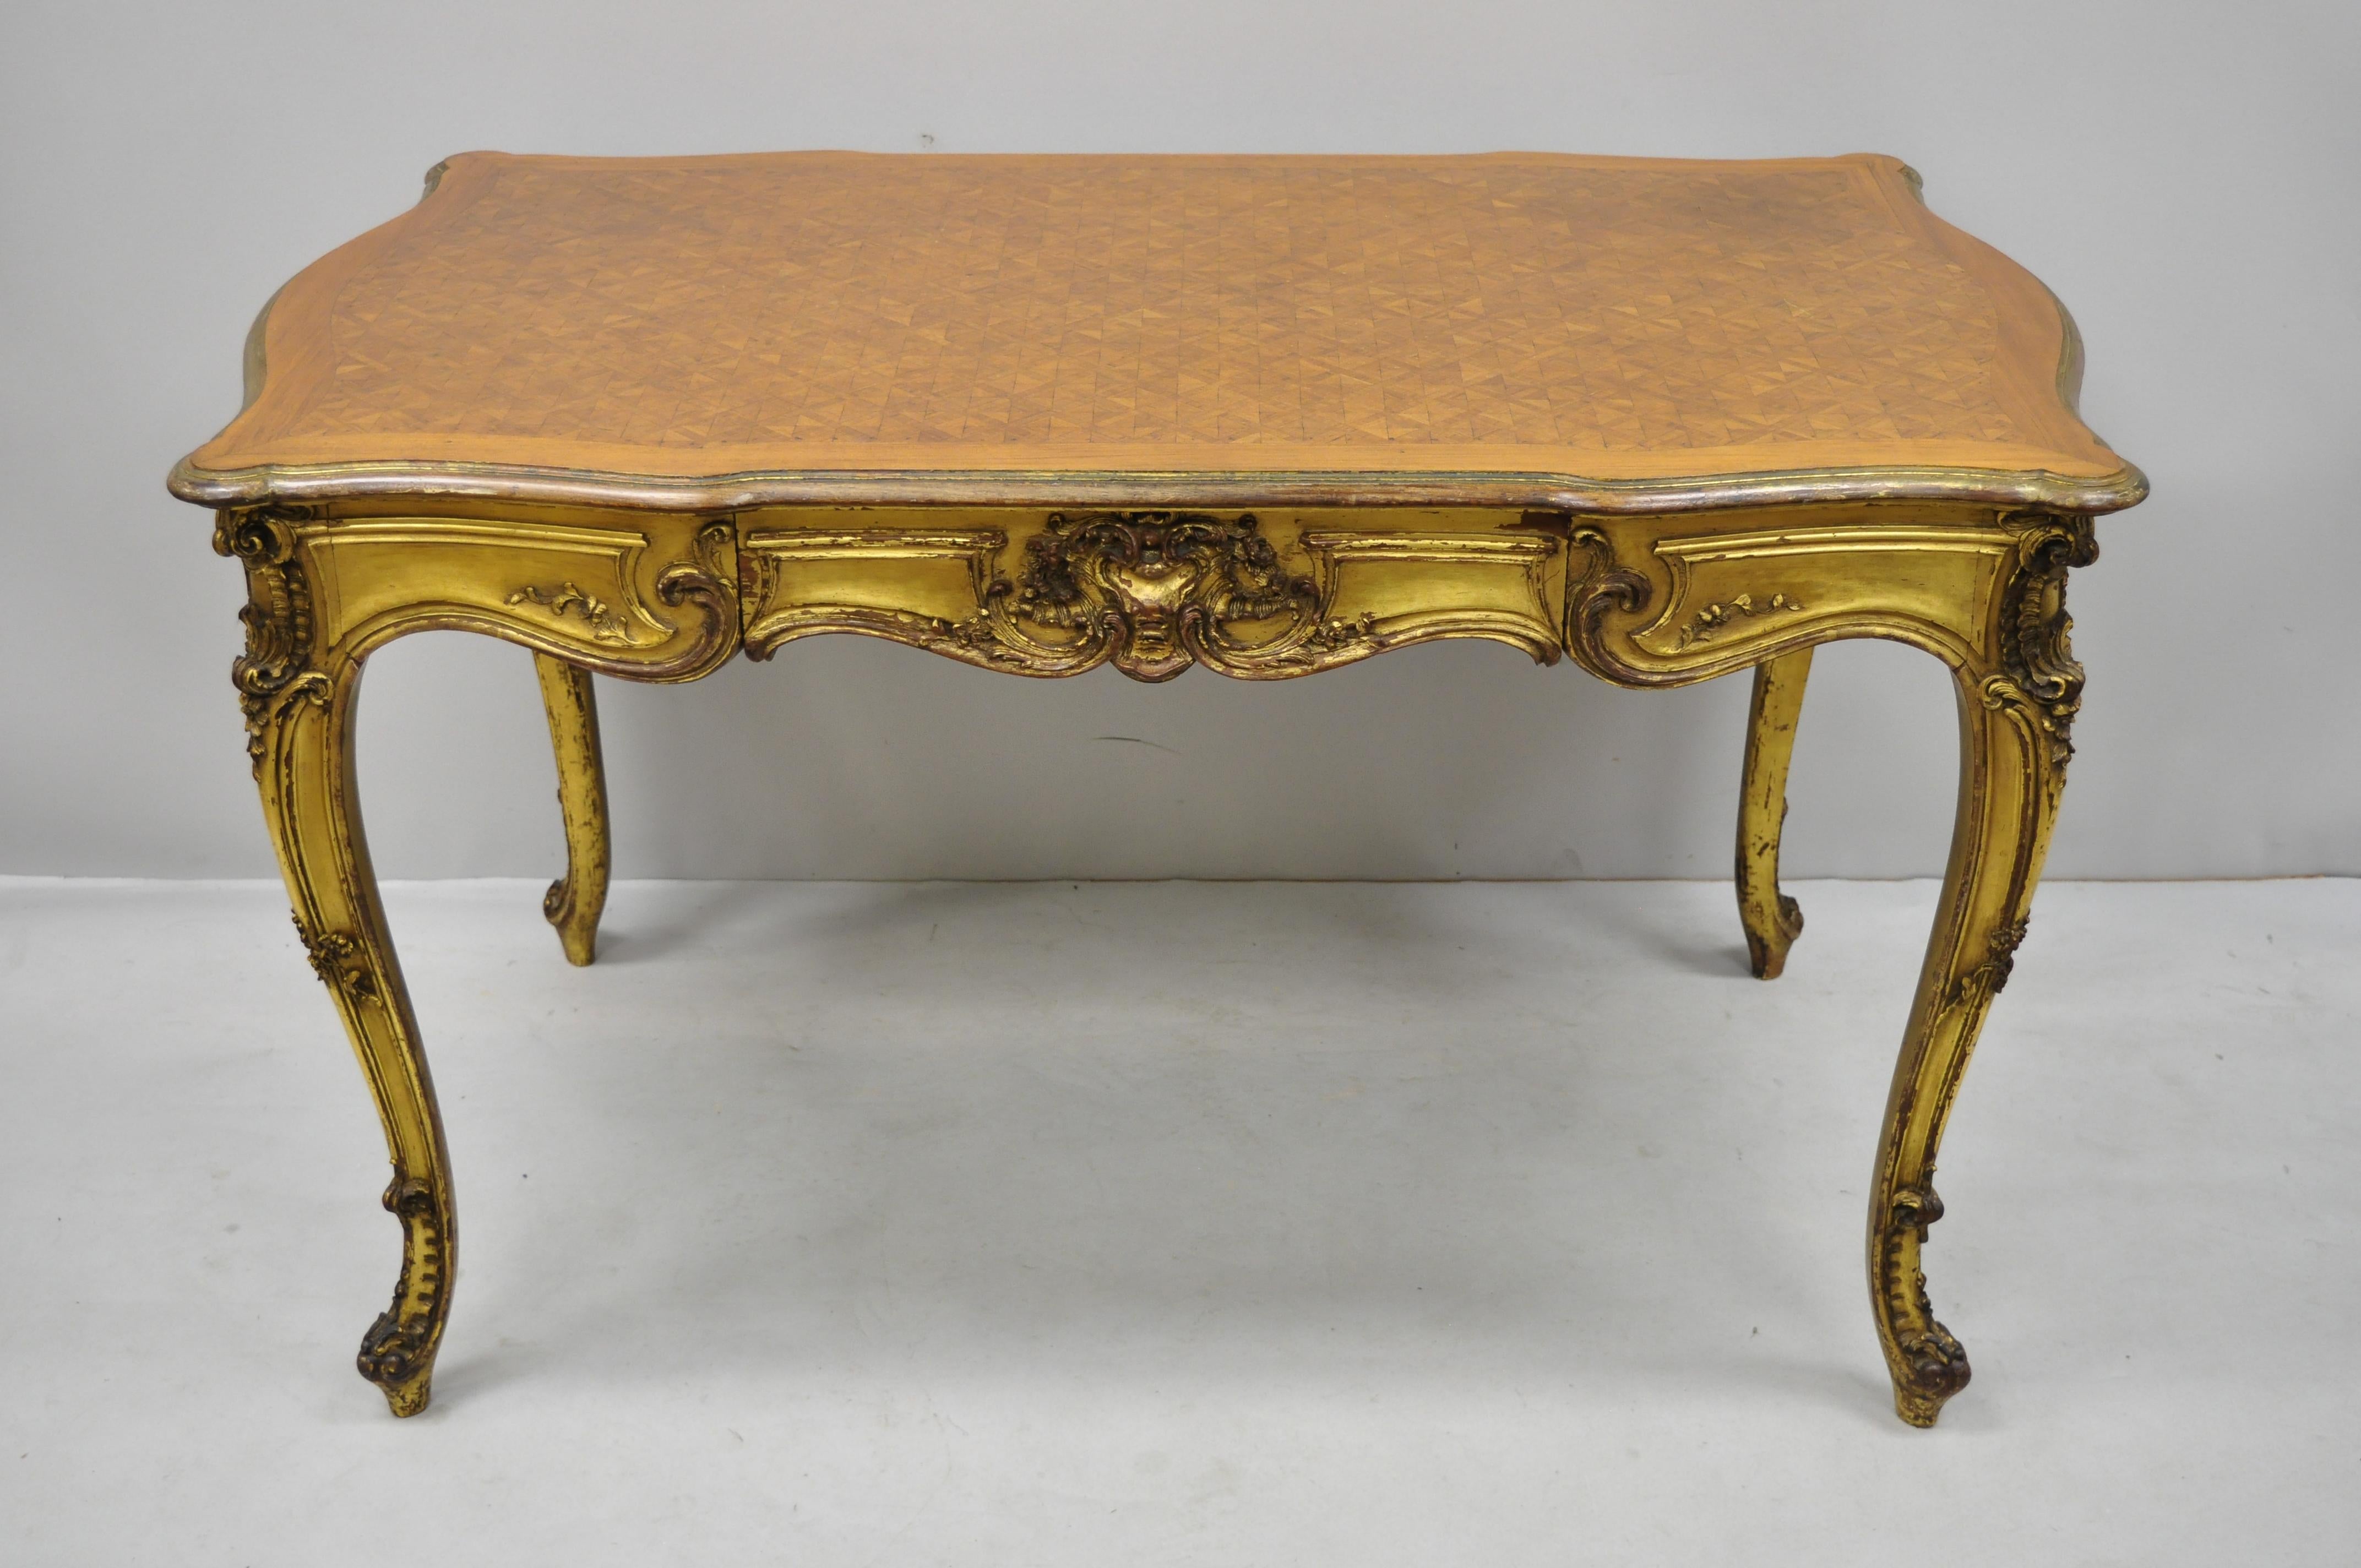 19th century French Louis XV style gold gilt small writing desk with marquetry inlaid top. Item features distressed gold gilt finish, shaped top, carvings on all sides, stunning marquetry inlaid top, 1 dovetailed drawer, cabriole legs, very nice